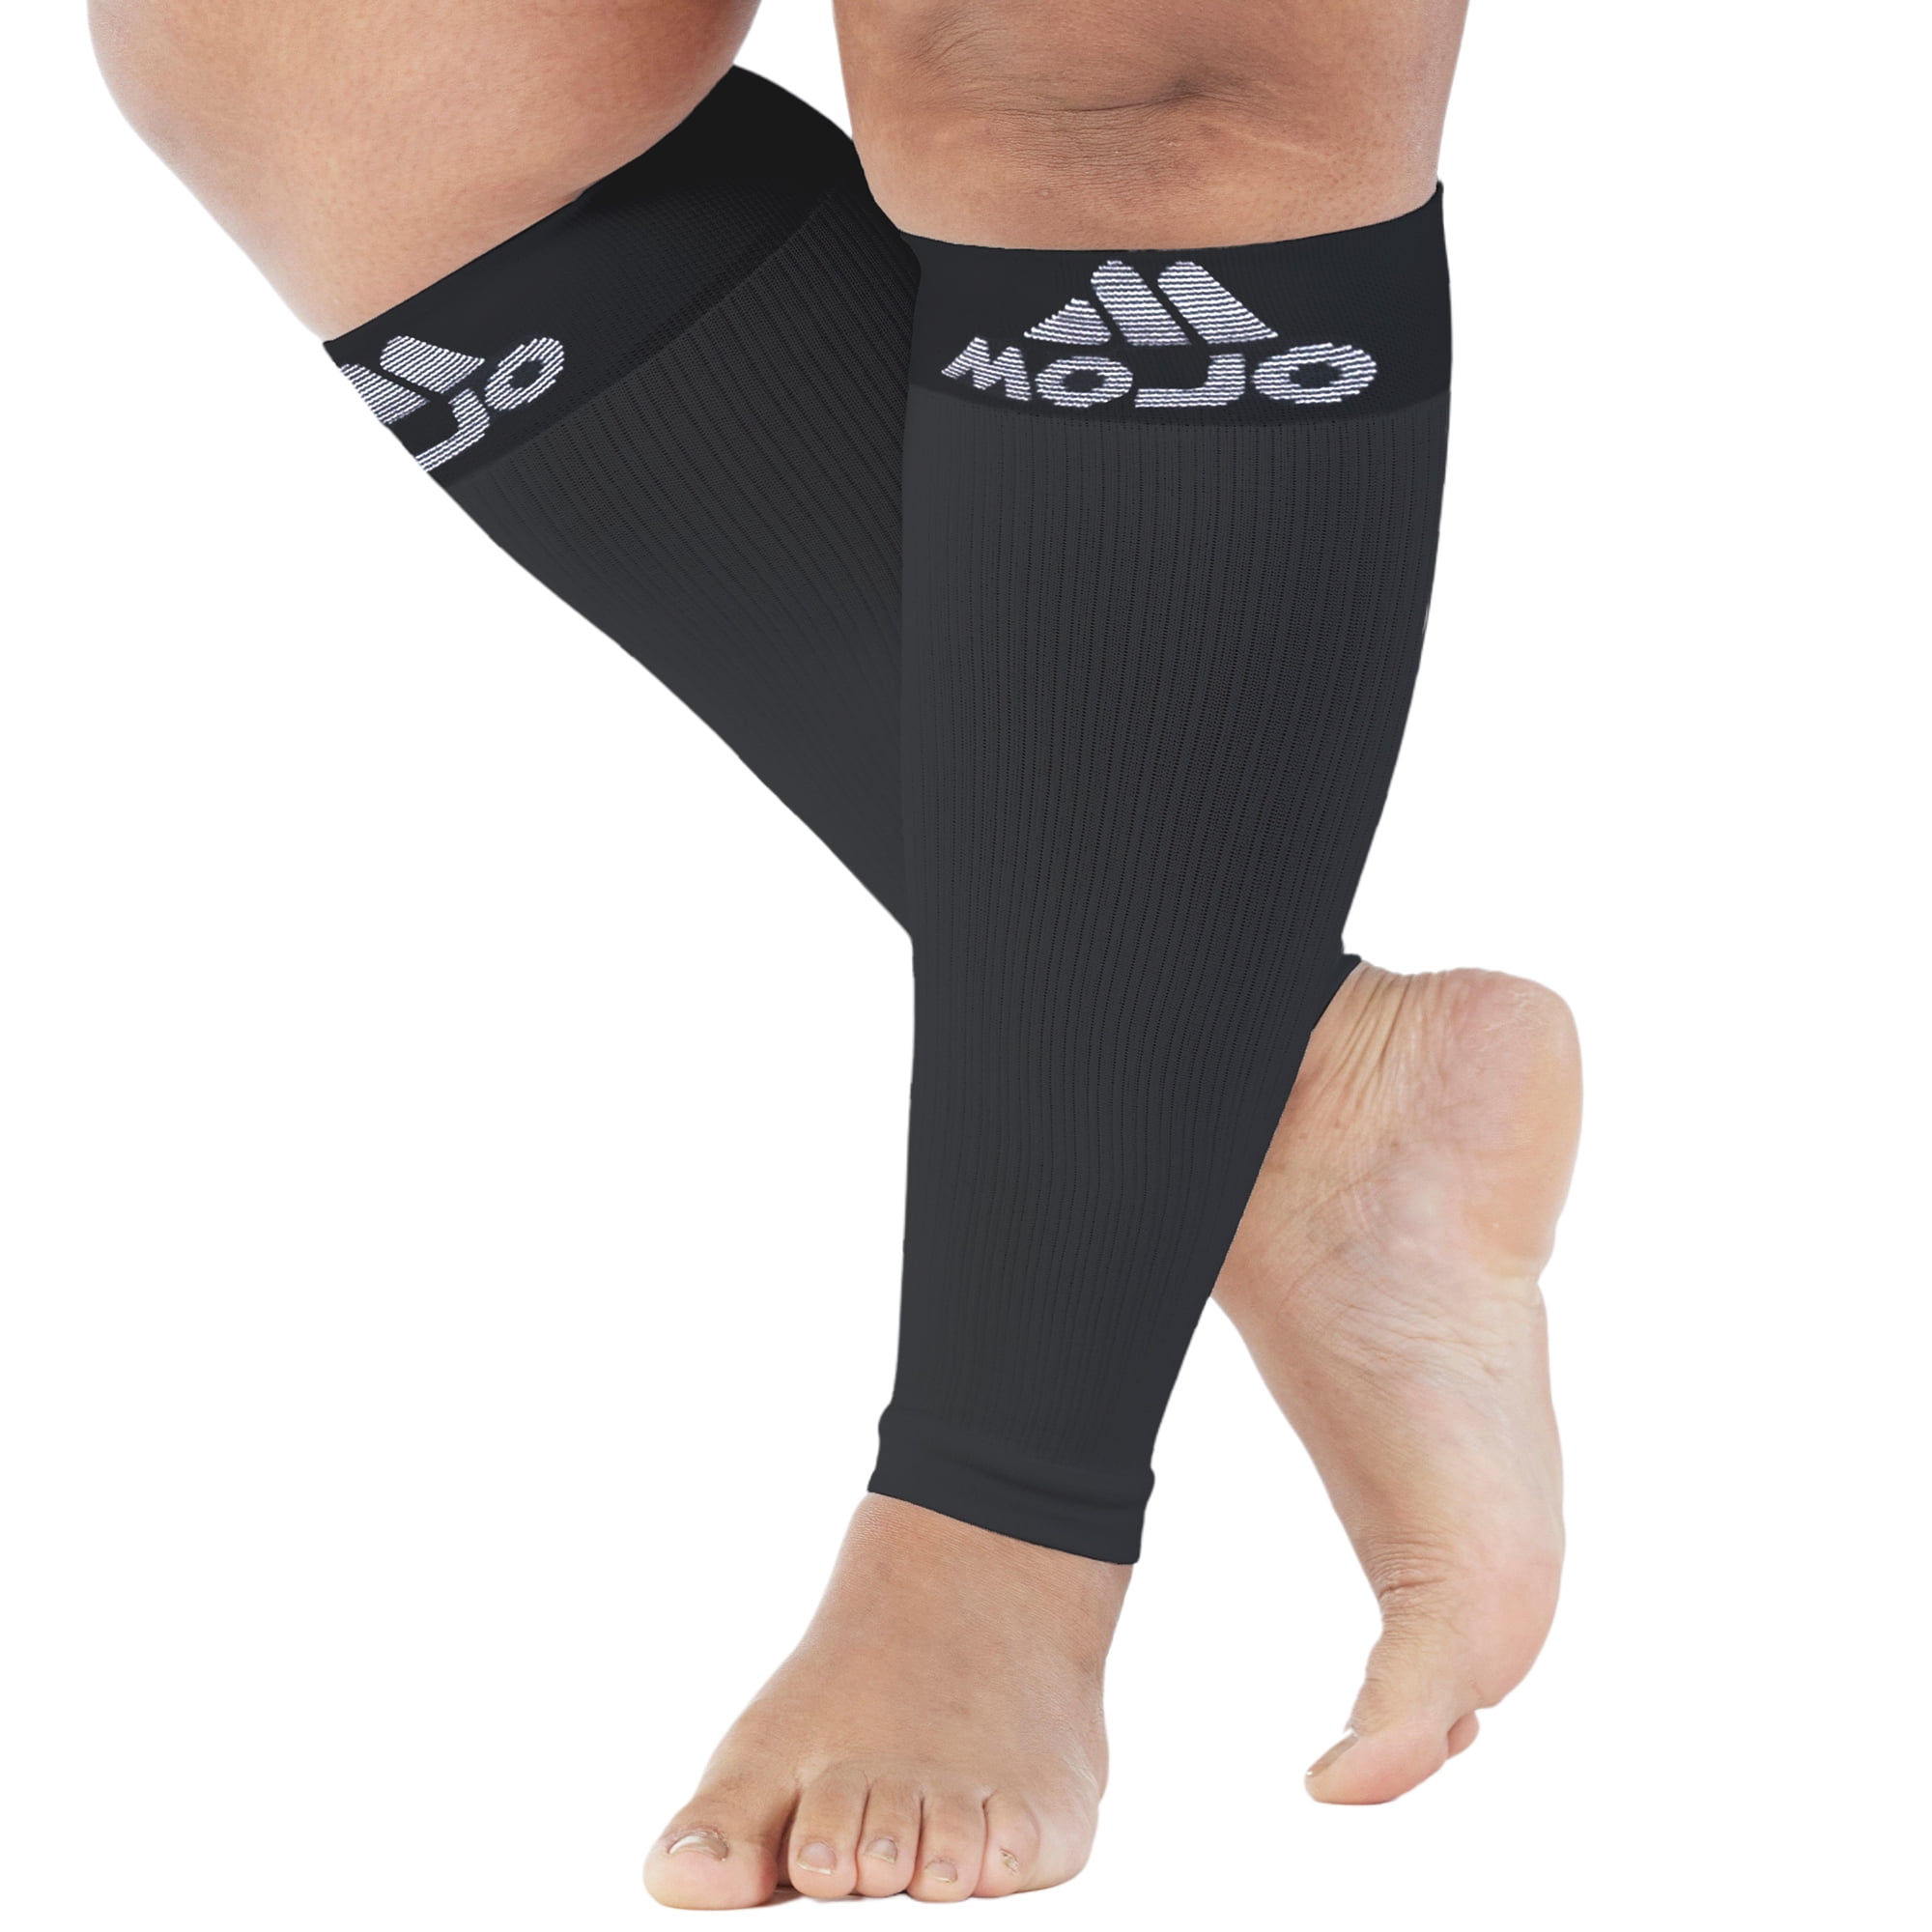 Plus Size Compression Calf Sleeve for Men and Women 20-30mmHg